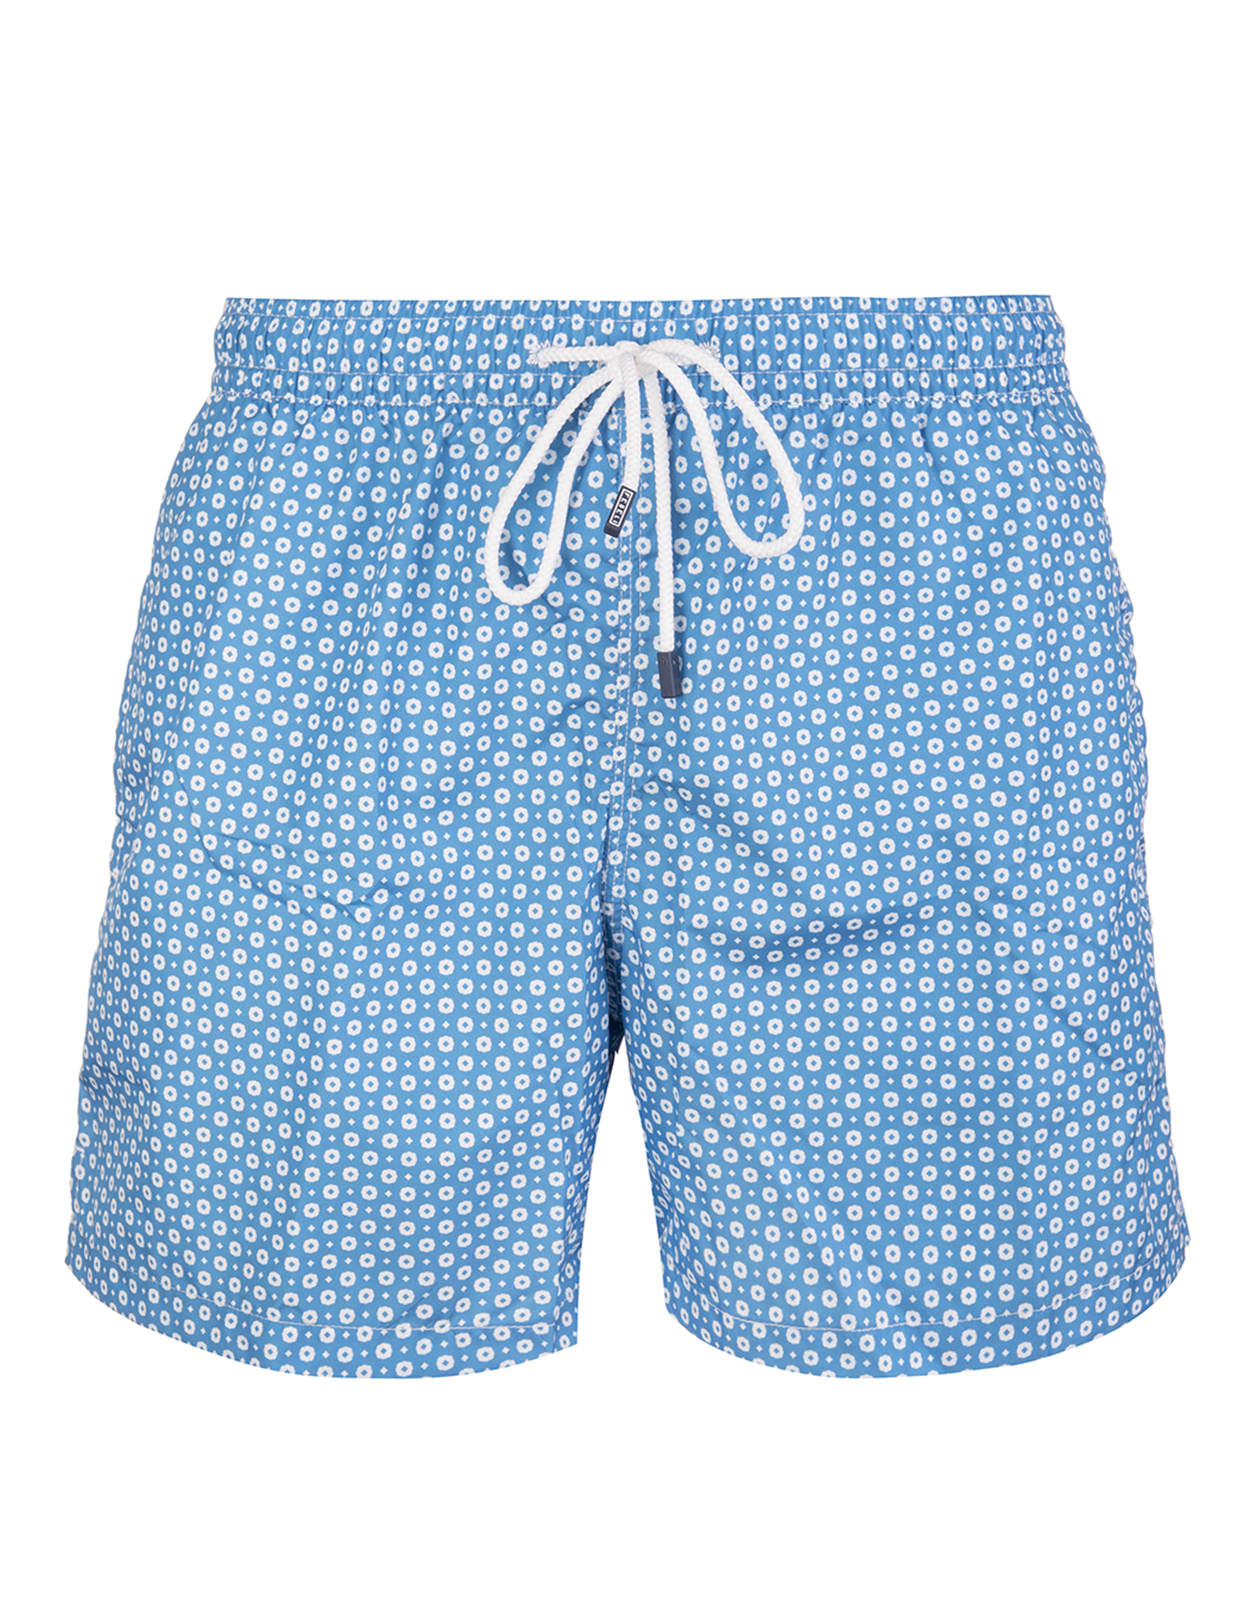 Fedeli Azure Swimming Trunks With Floral Micro Pattern